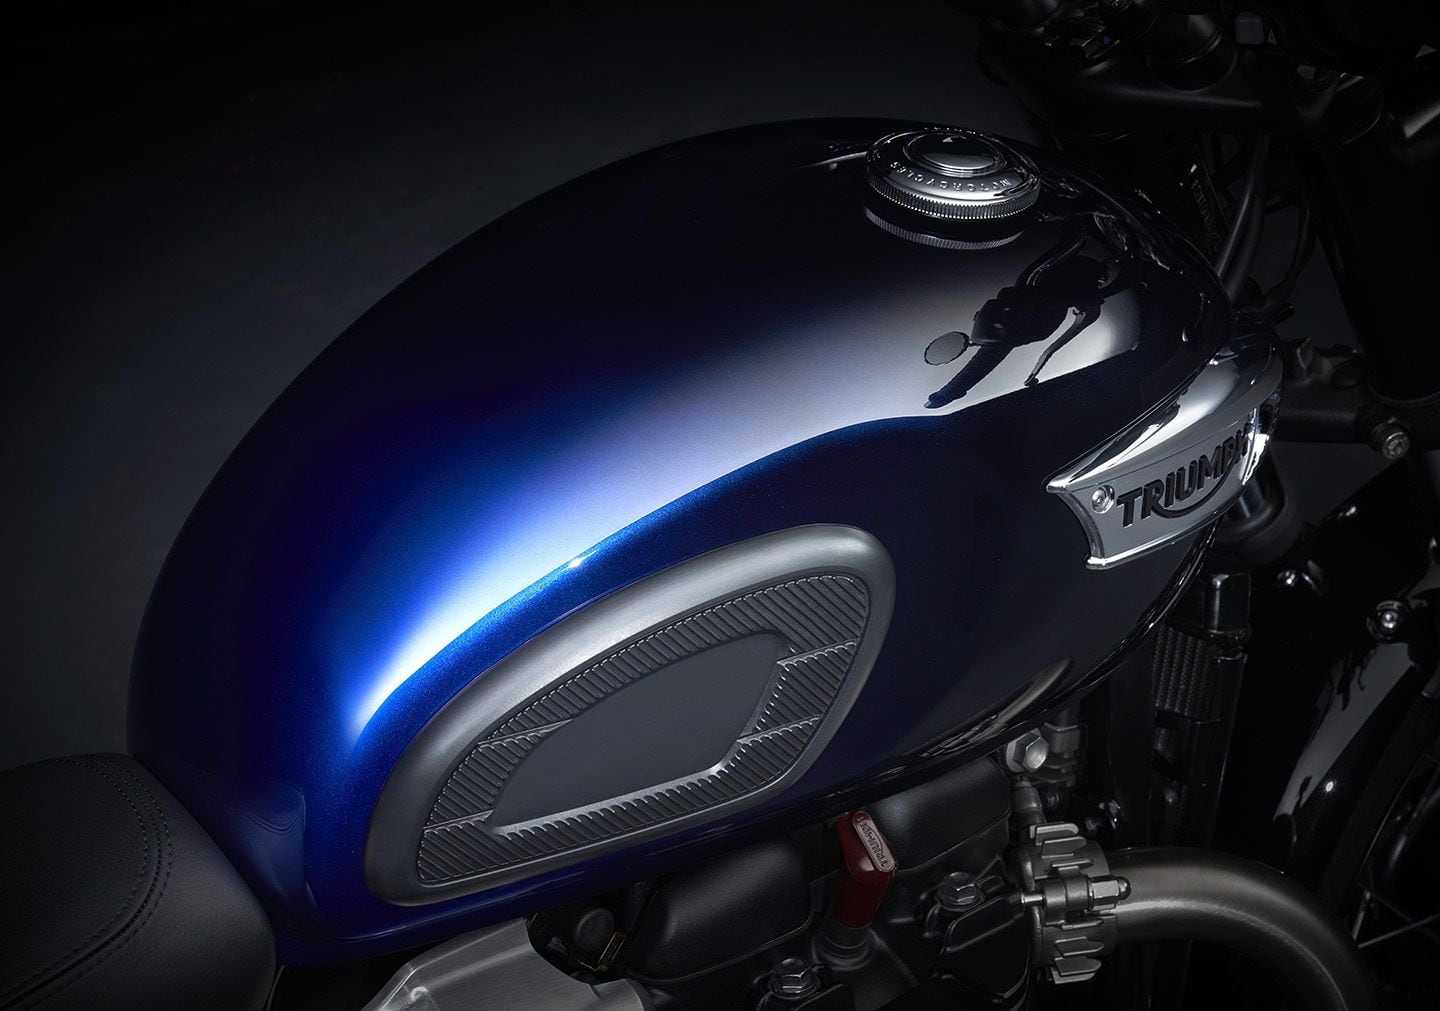 The T100 classes it up with a rich blue tone on the tank to contrast with its blacked-out bits. The bike’s easy-handling, responsive 900cc engine is unchanged.